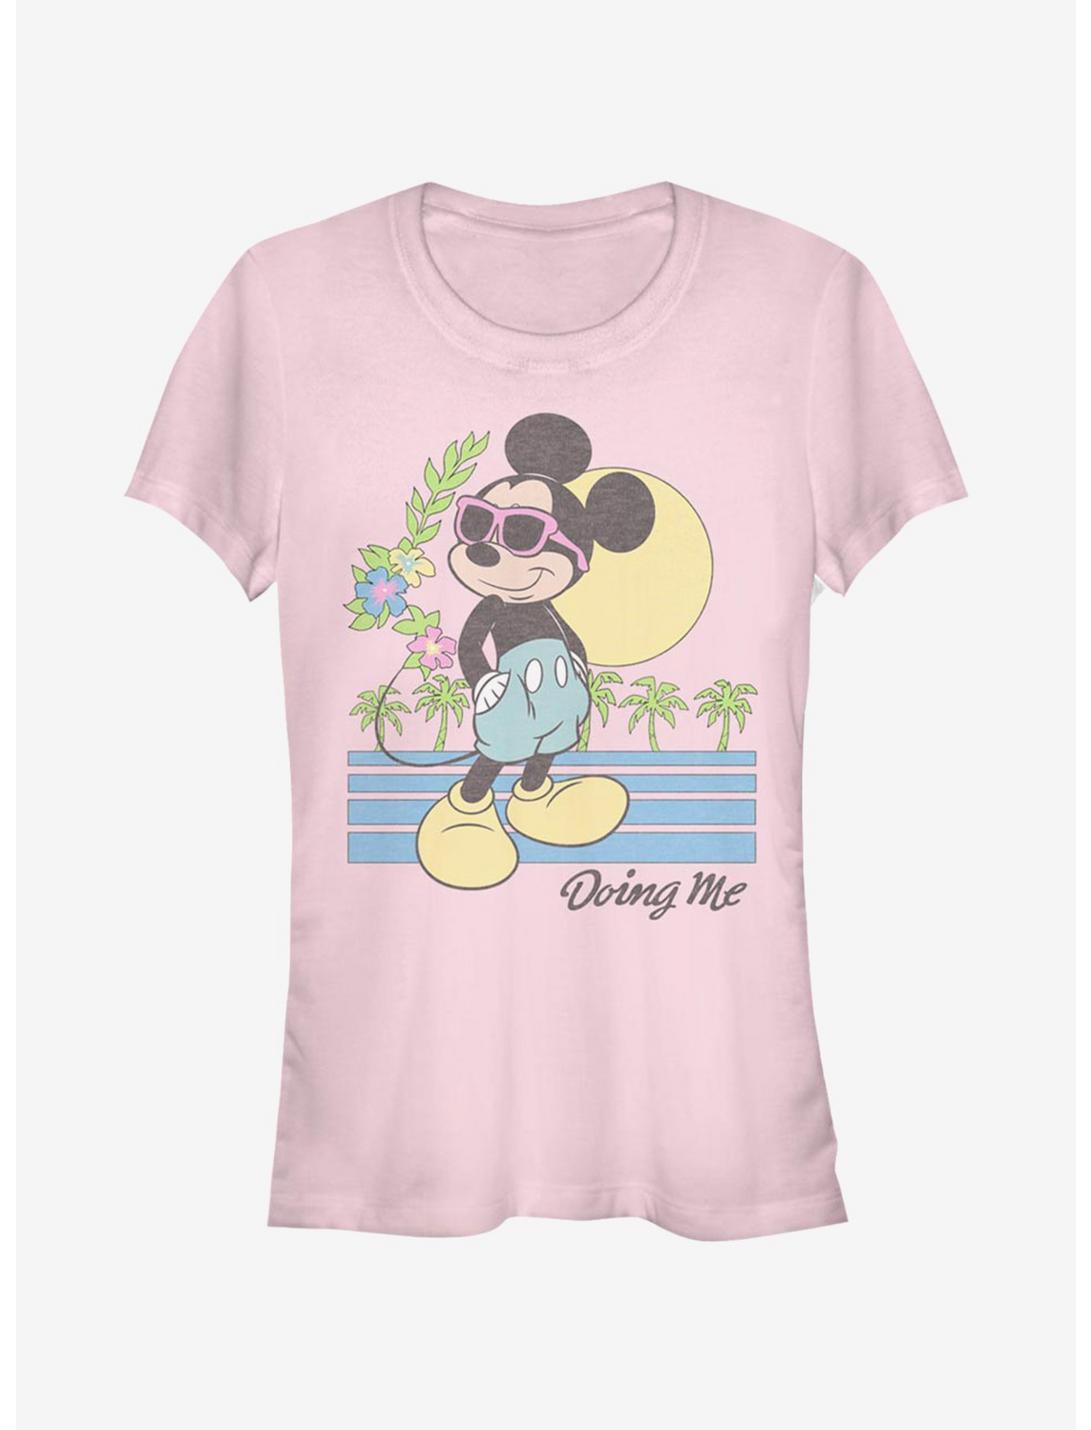 Disney Mickey Mouse Mickey Doing Me Girls T-Shirt, LIGHT PINK, hi-res